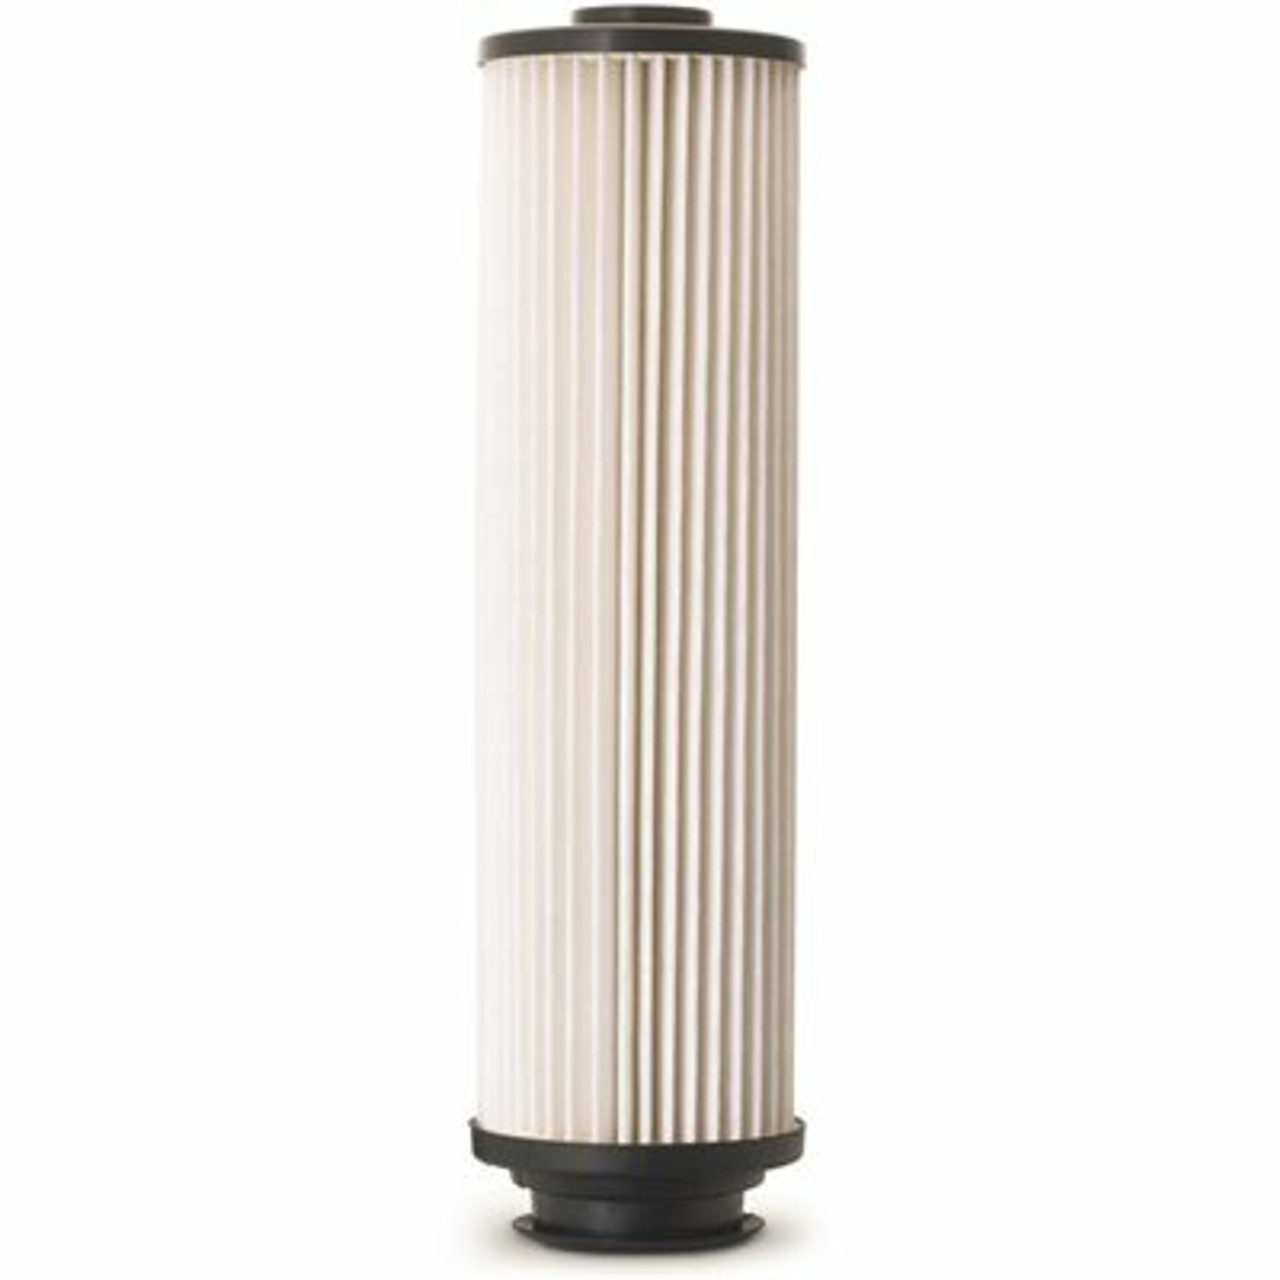 Hoover Type 201 Long-Life Hepa Cartridge Filter For Hoover Bagless Uprights